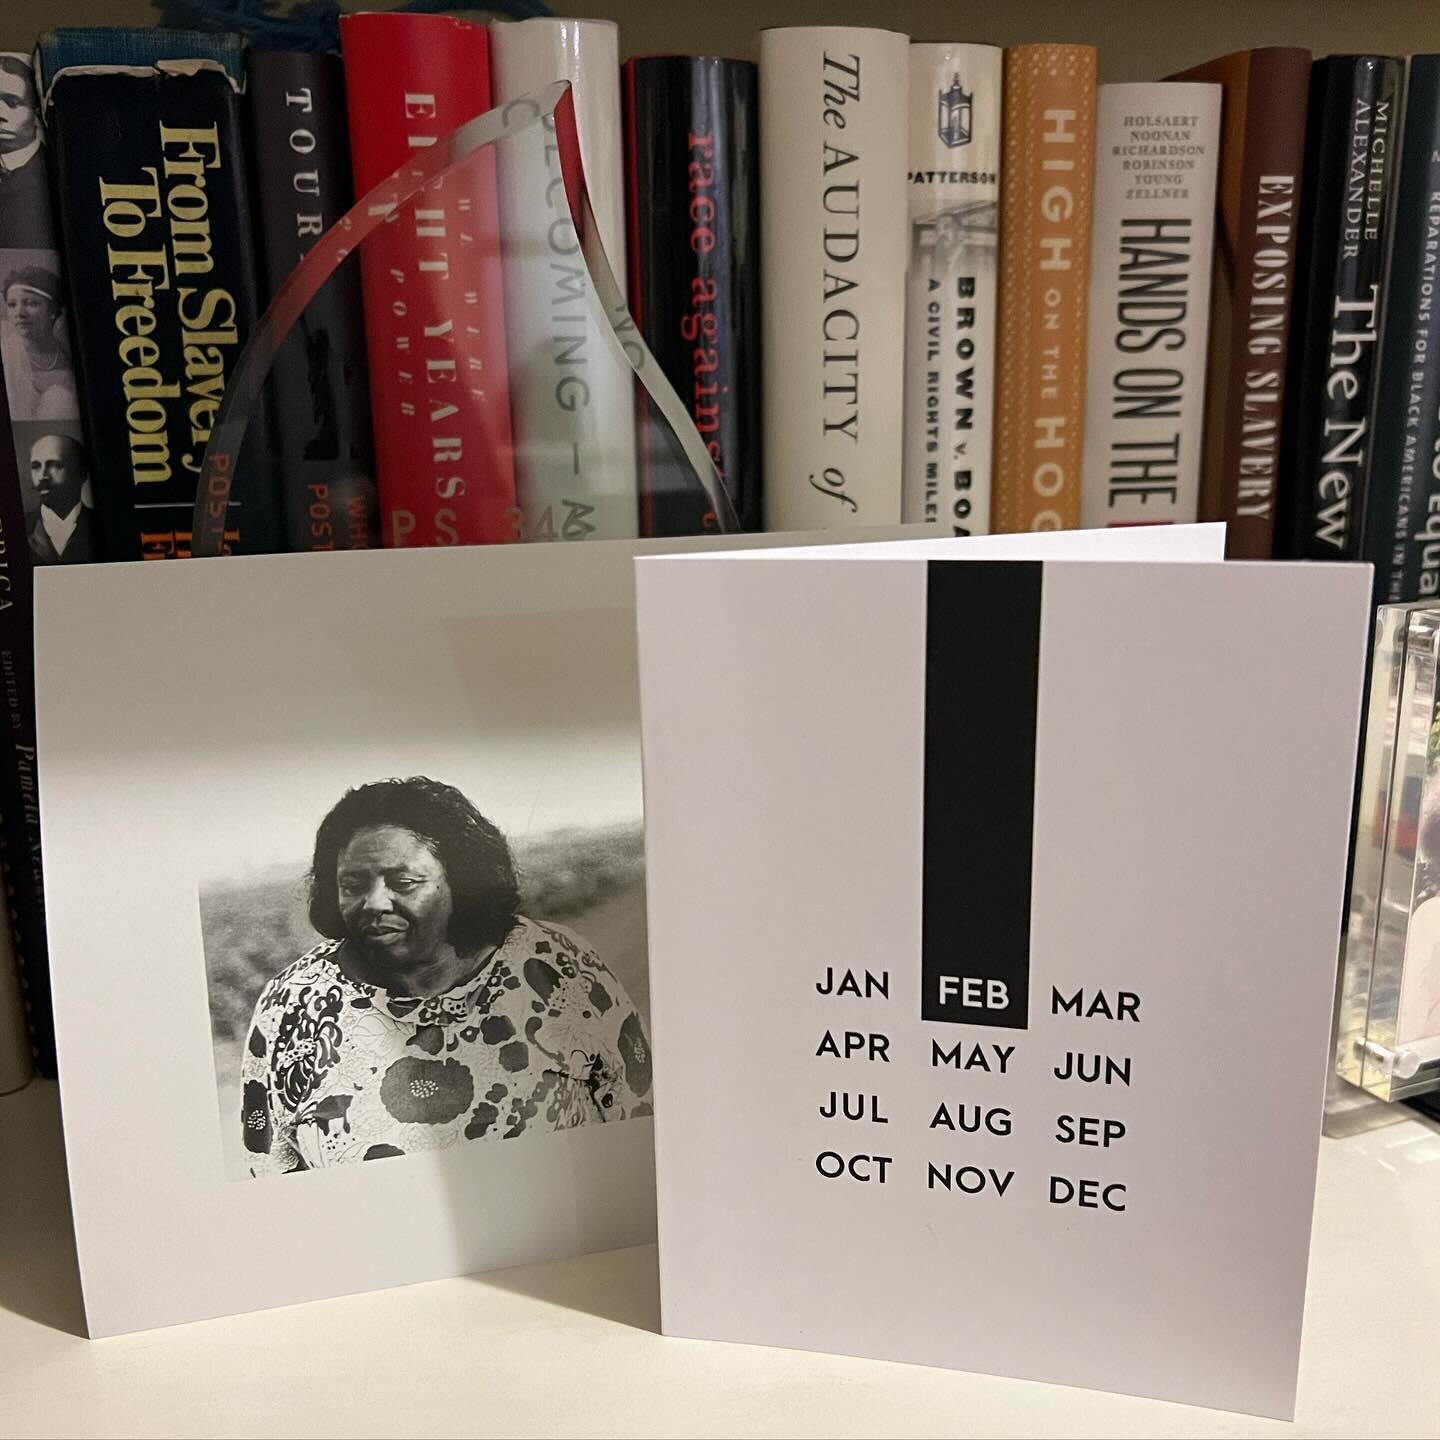 February is almost here. That means Black History Month is coming! Celebrate by reaching out to a young person&mdash;in the spirit of an American hero like Fannie Lou Hamer&mdash;by sending a @junebuginkstationery Black History Month card. Encouragem